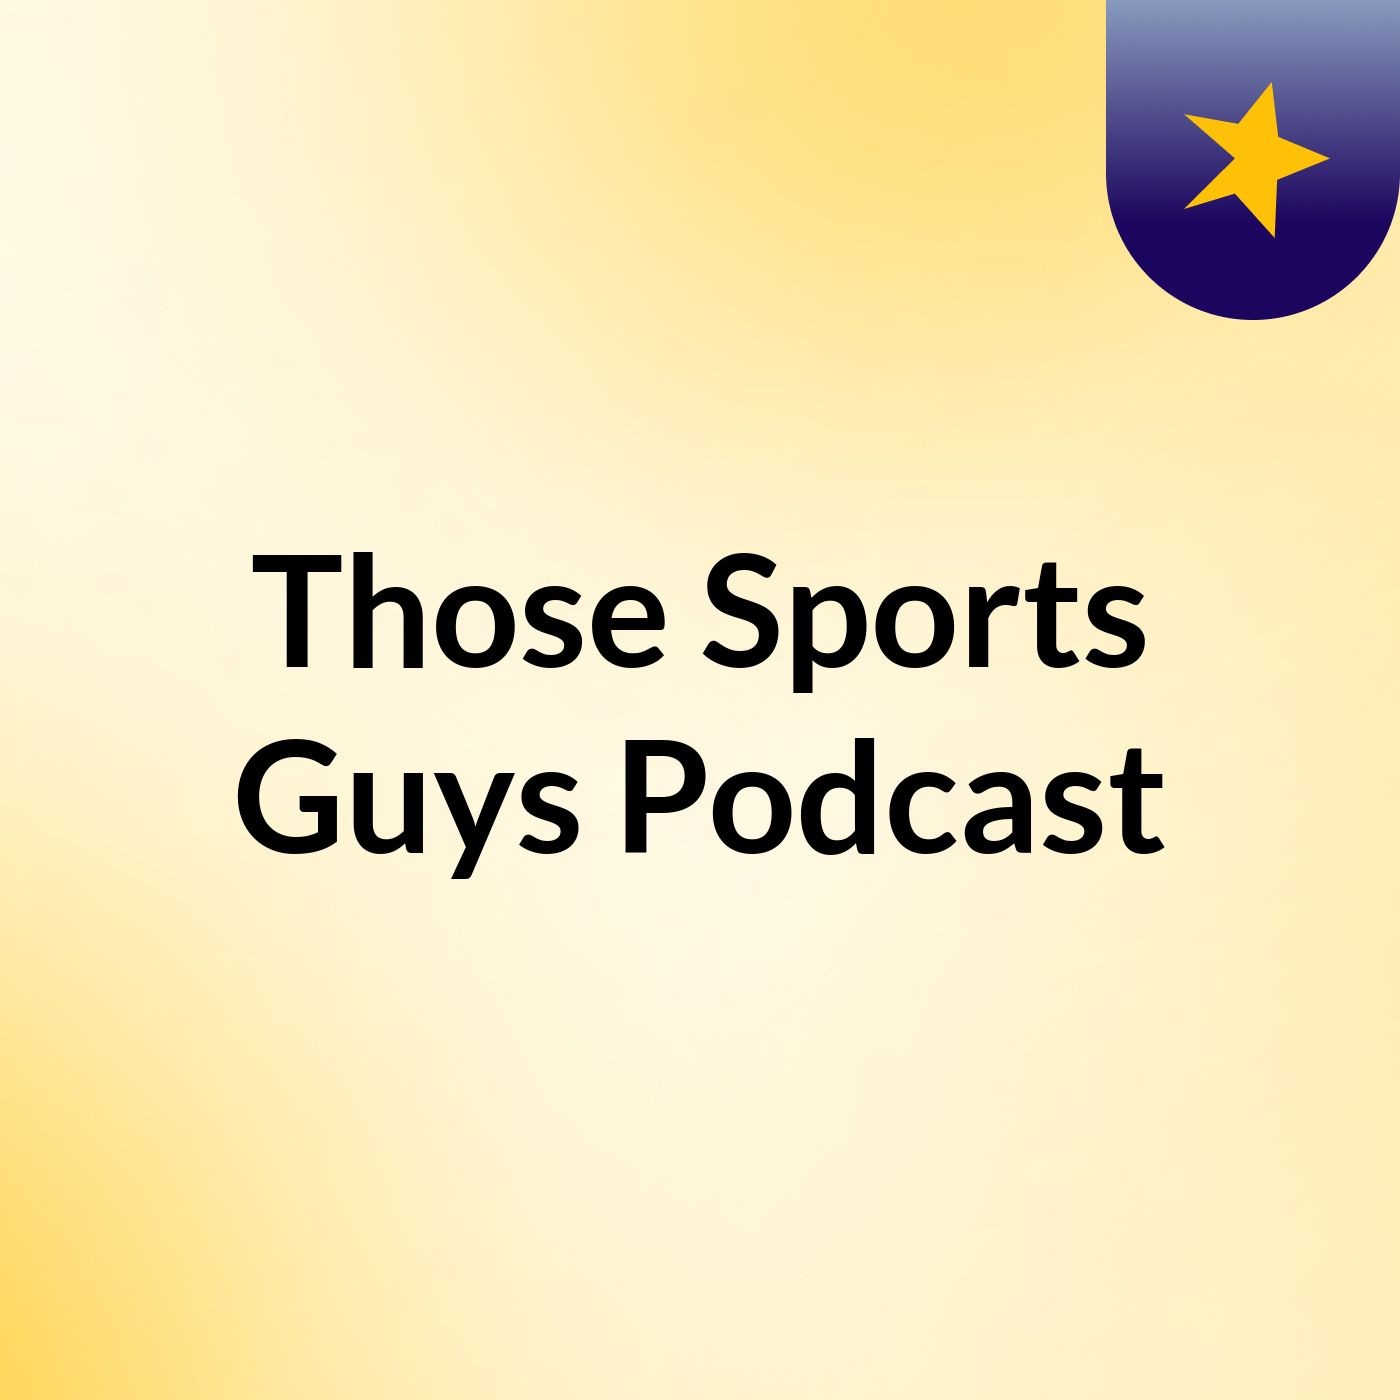 Those Sports Guys Podcast